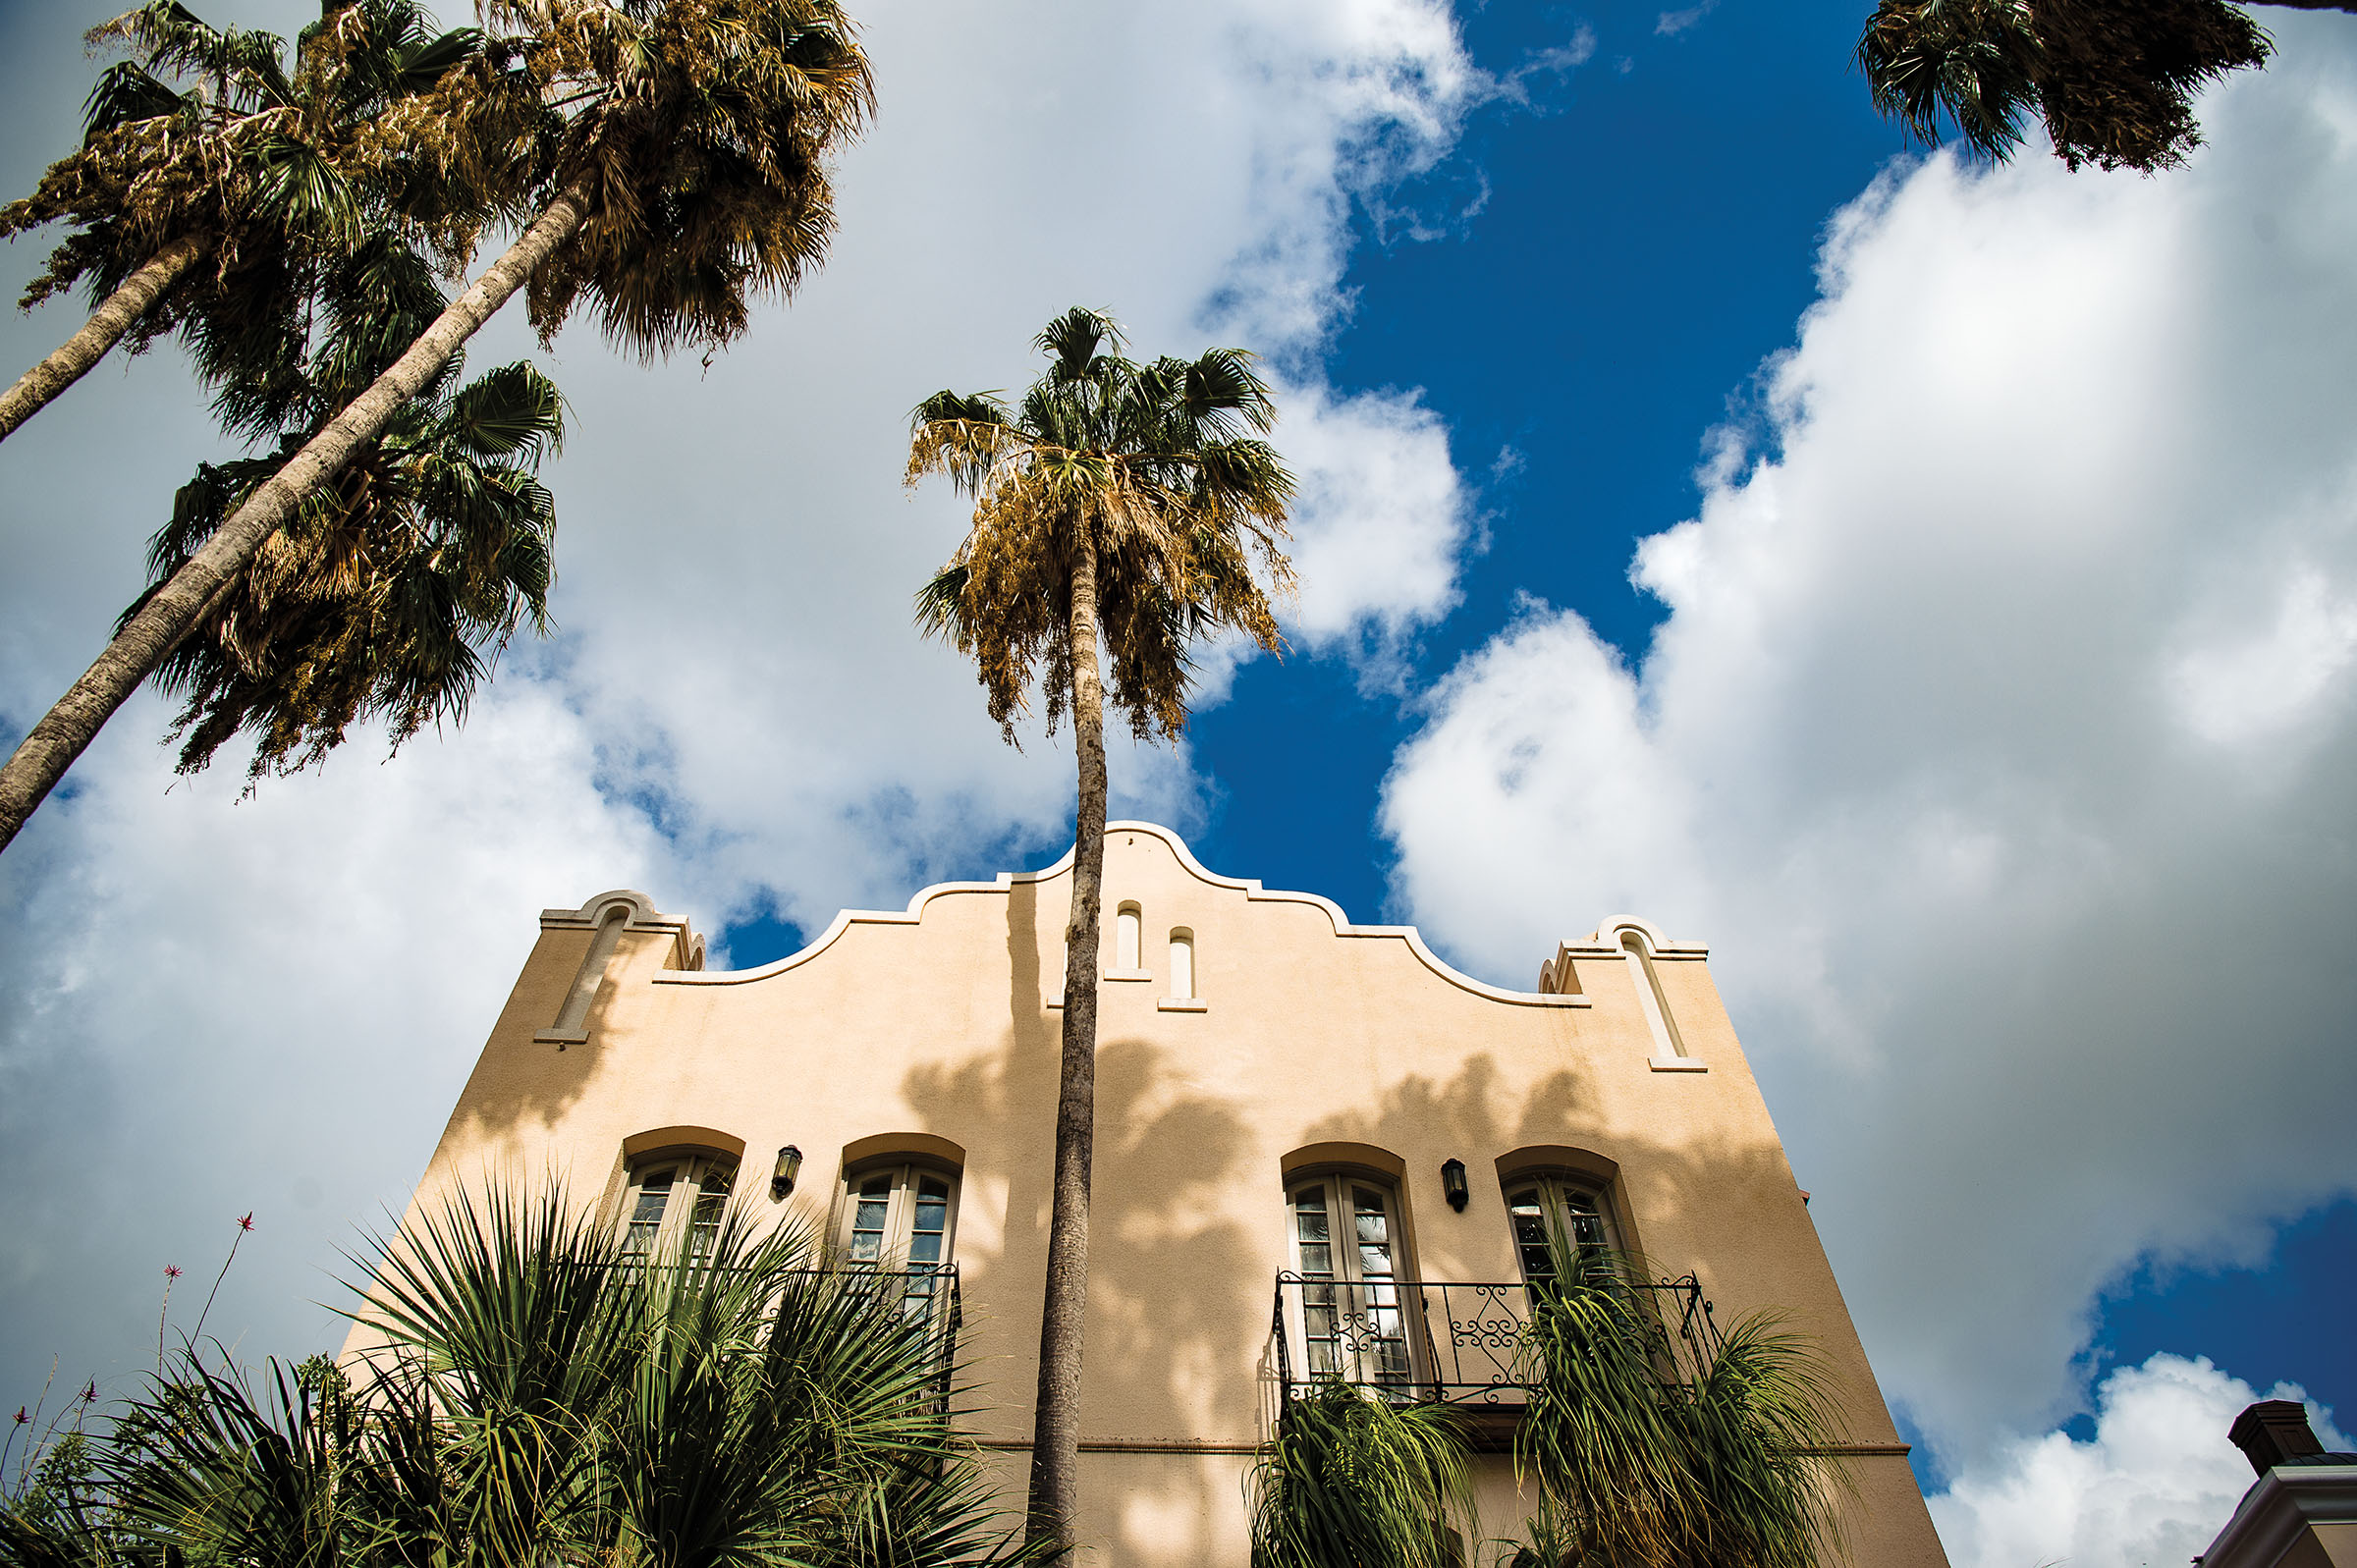 The exterior of a Spanish-style building with a tall palm tree in front